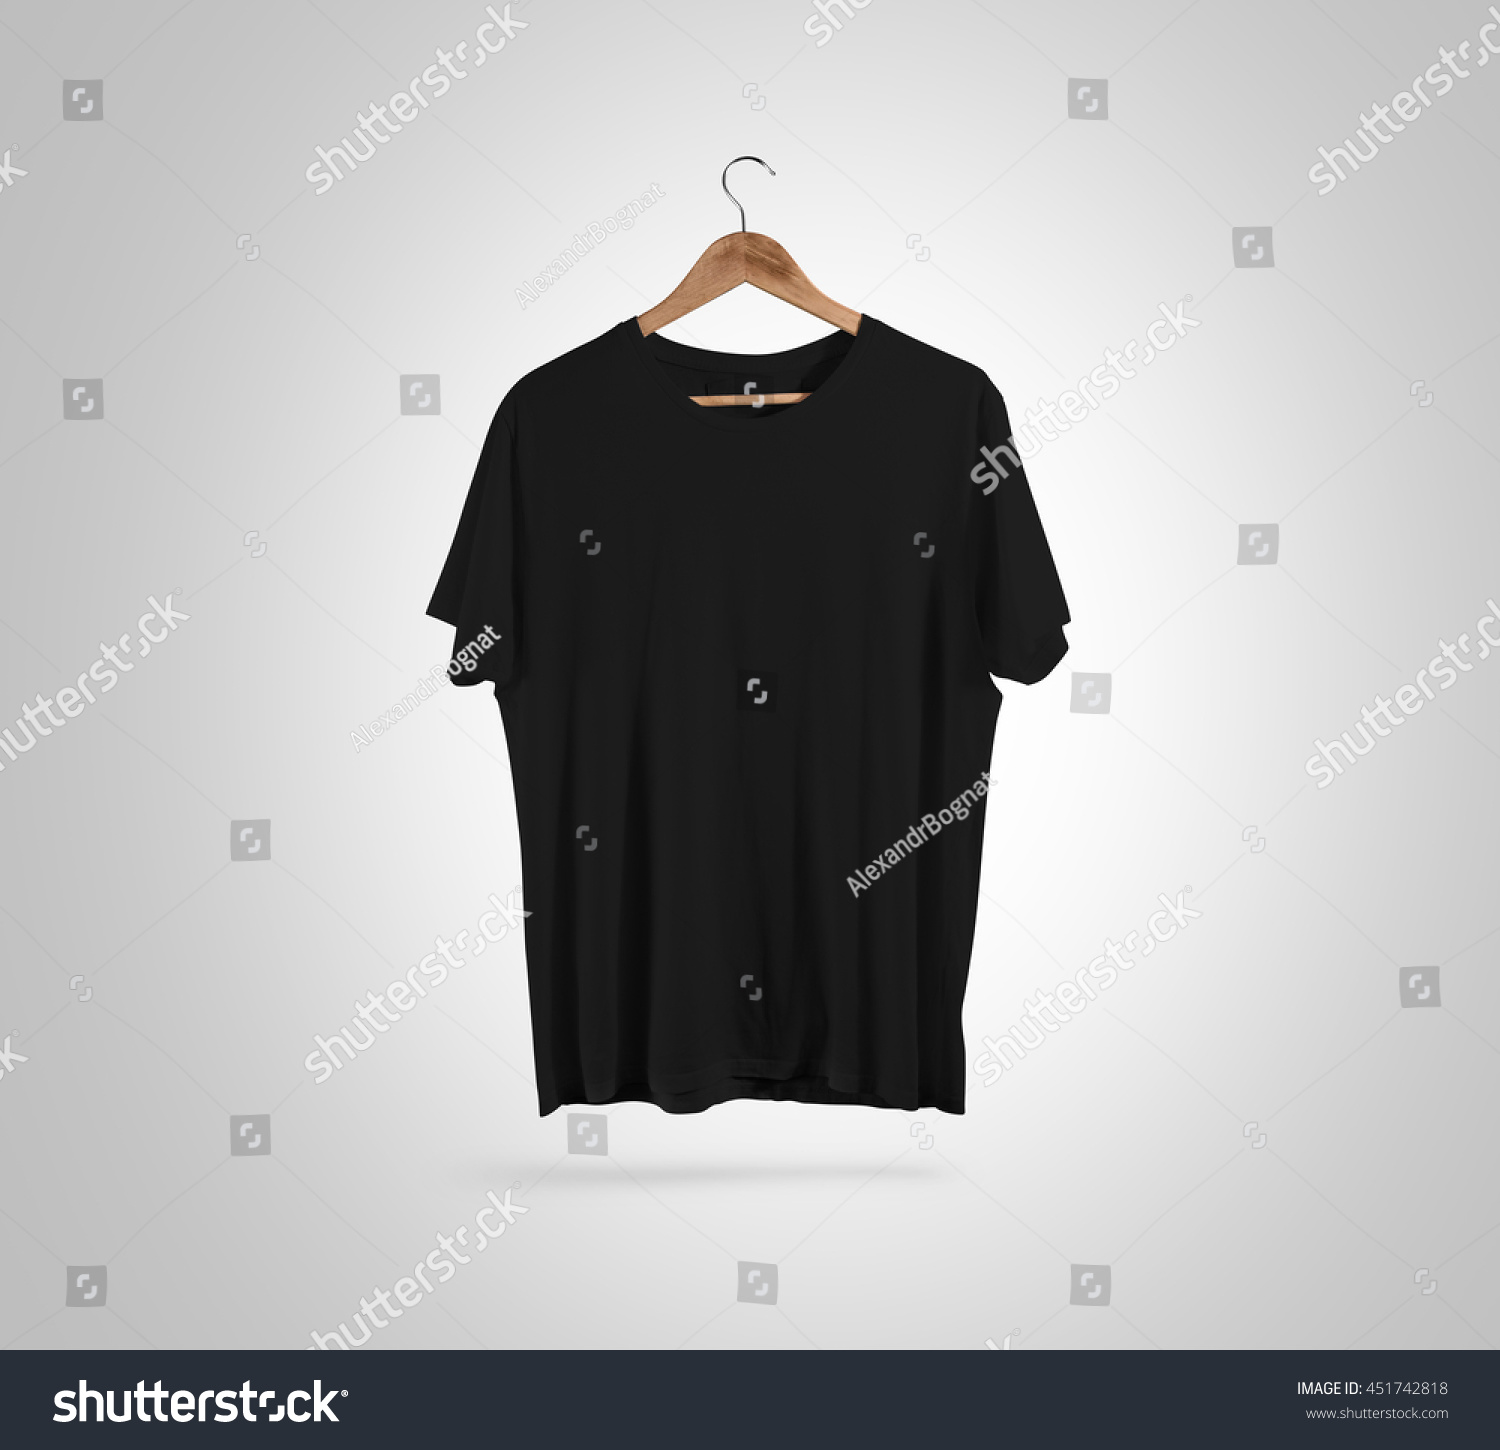 Blank Black Tshirt Front Side View Stock Photo 451742818 | Shutterstock